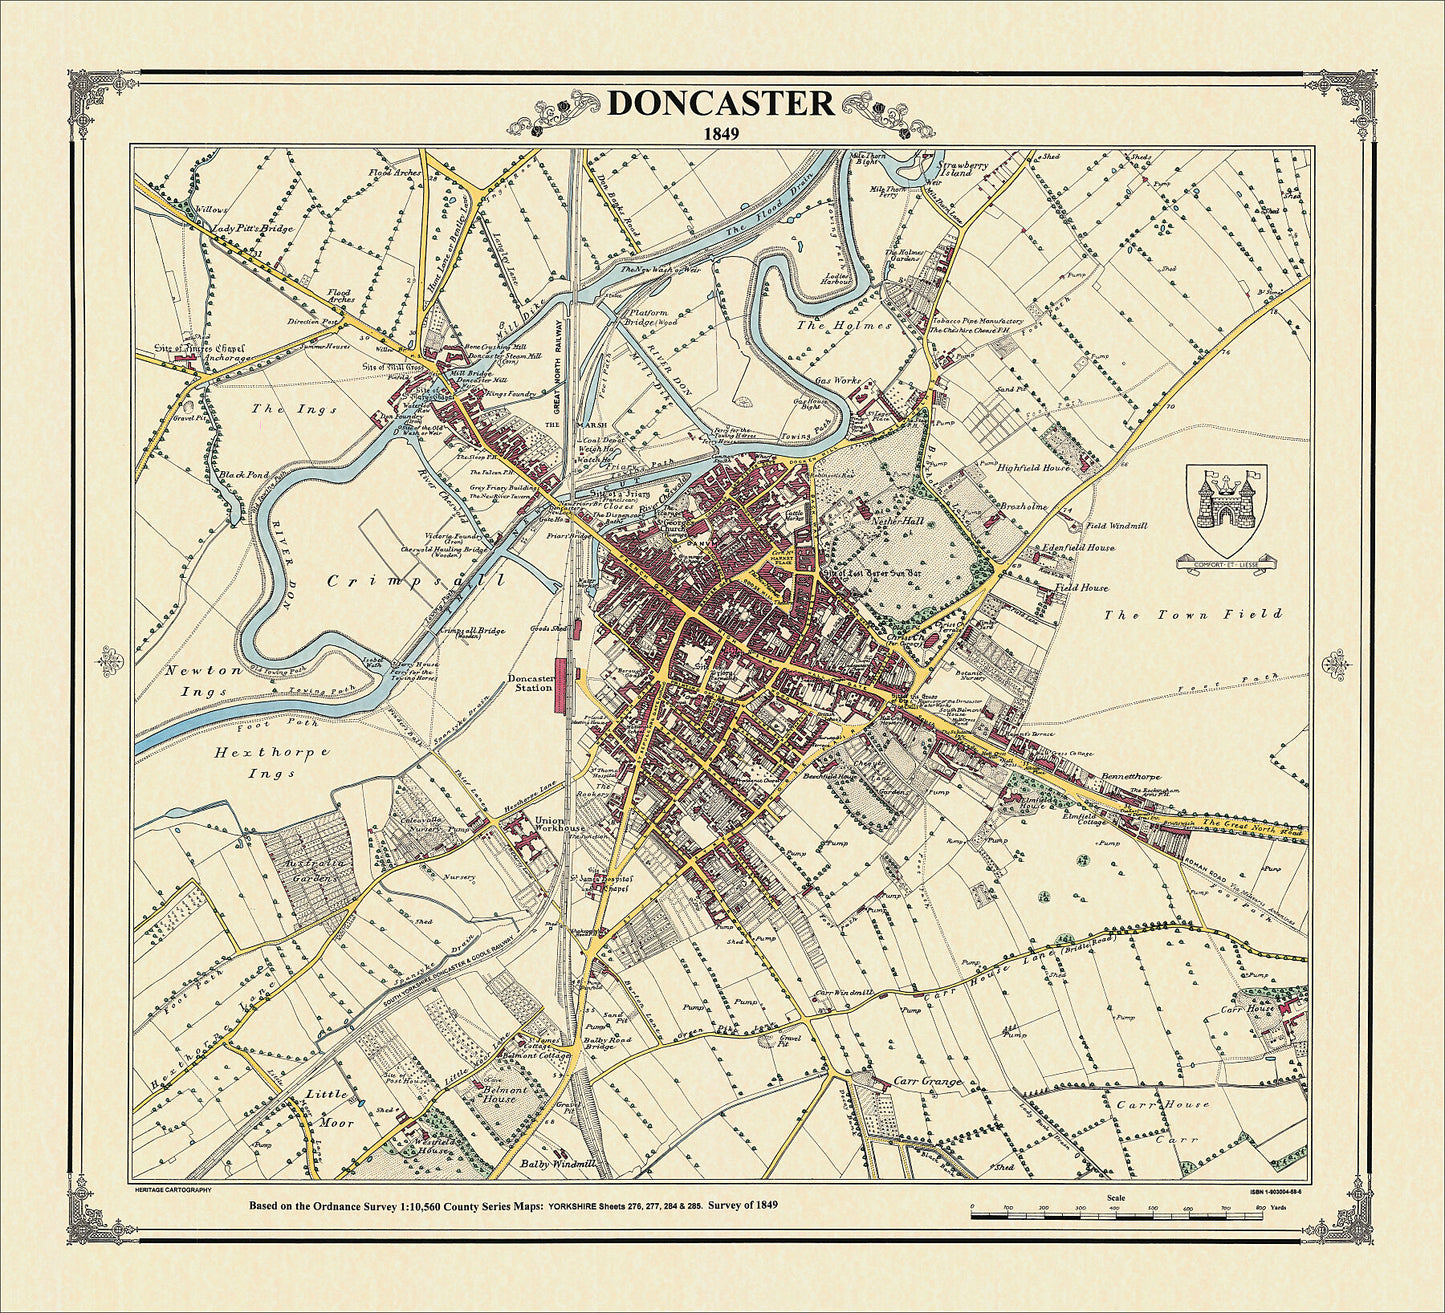 Coloured Victorian map of Doncaster in 1849 by Peter J Adams of Heritage Cartography